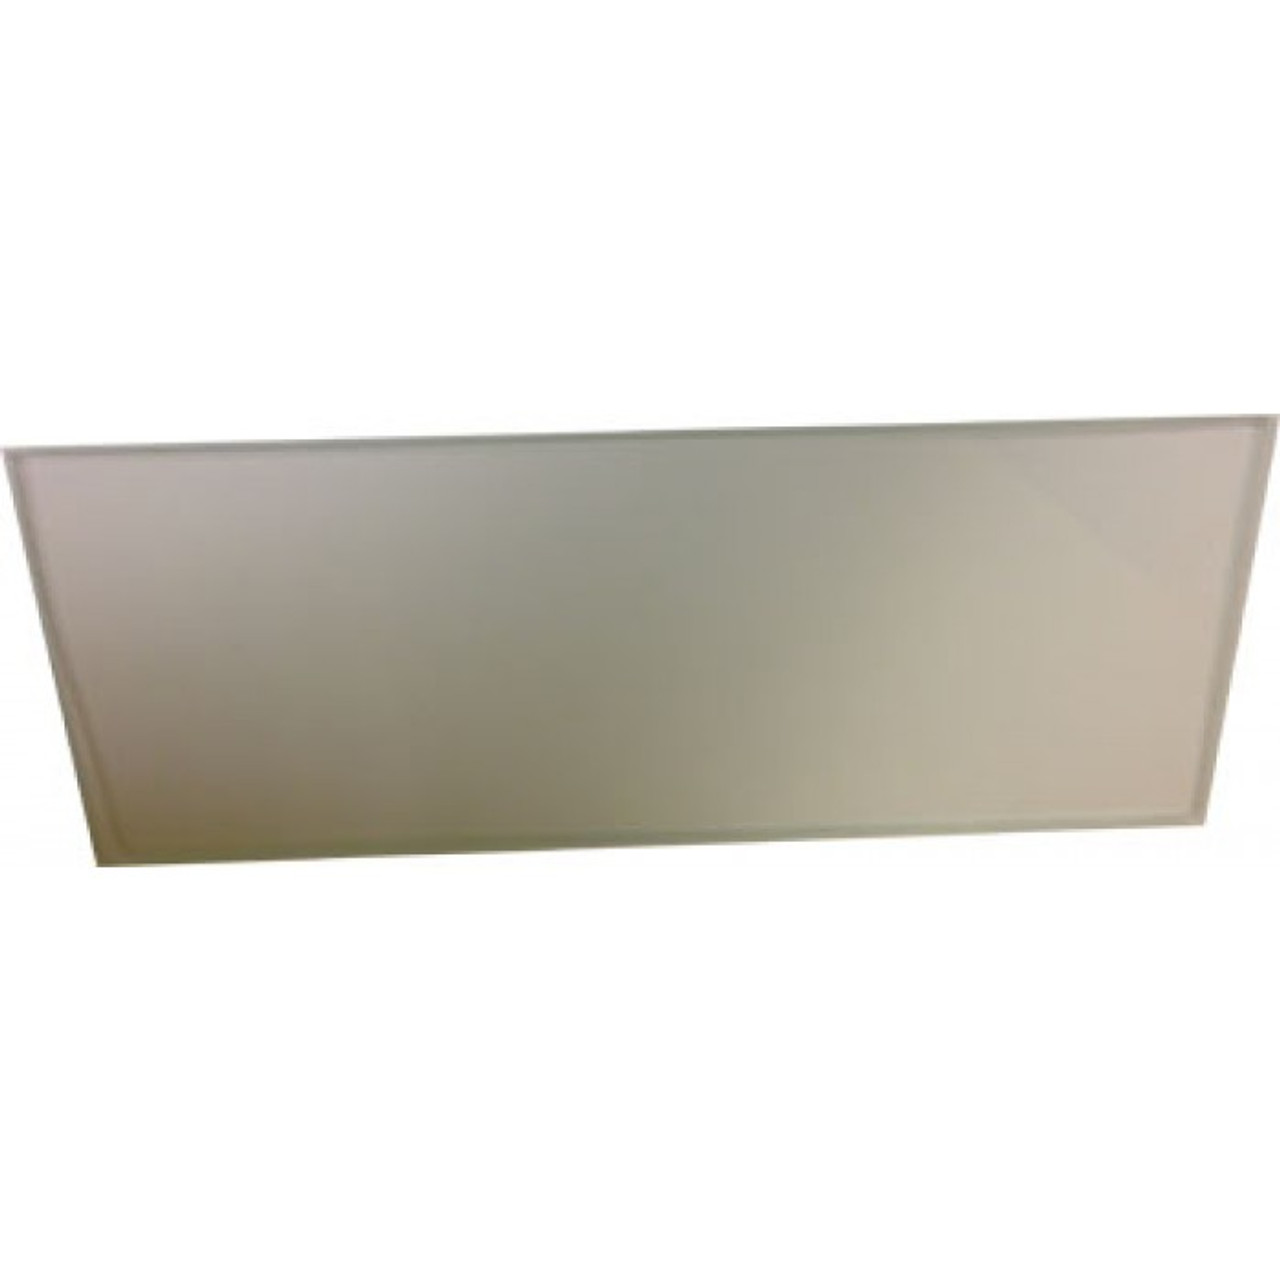 887460-001-001 - Glass Replacement Main Display